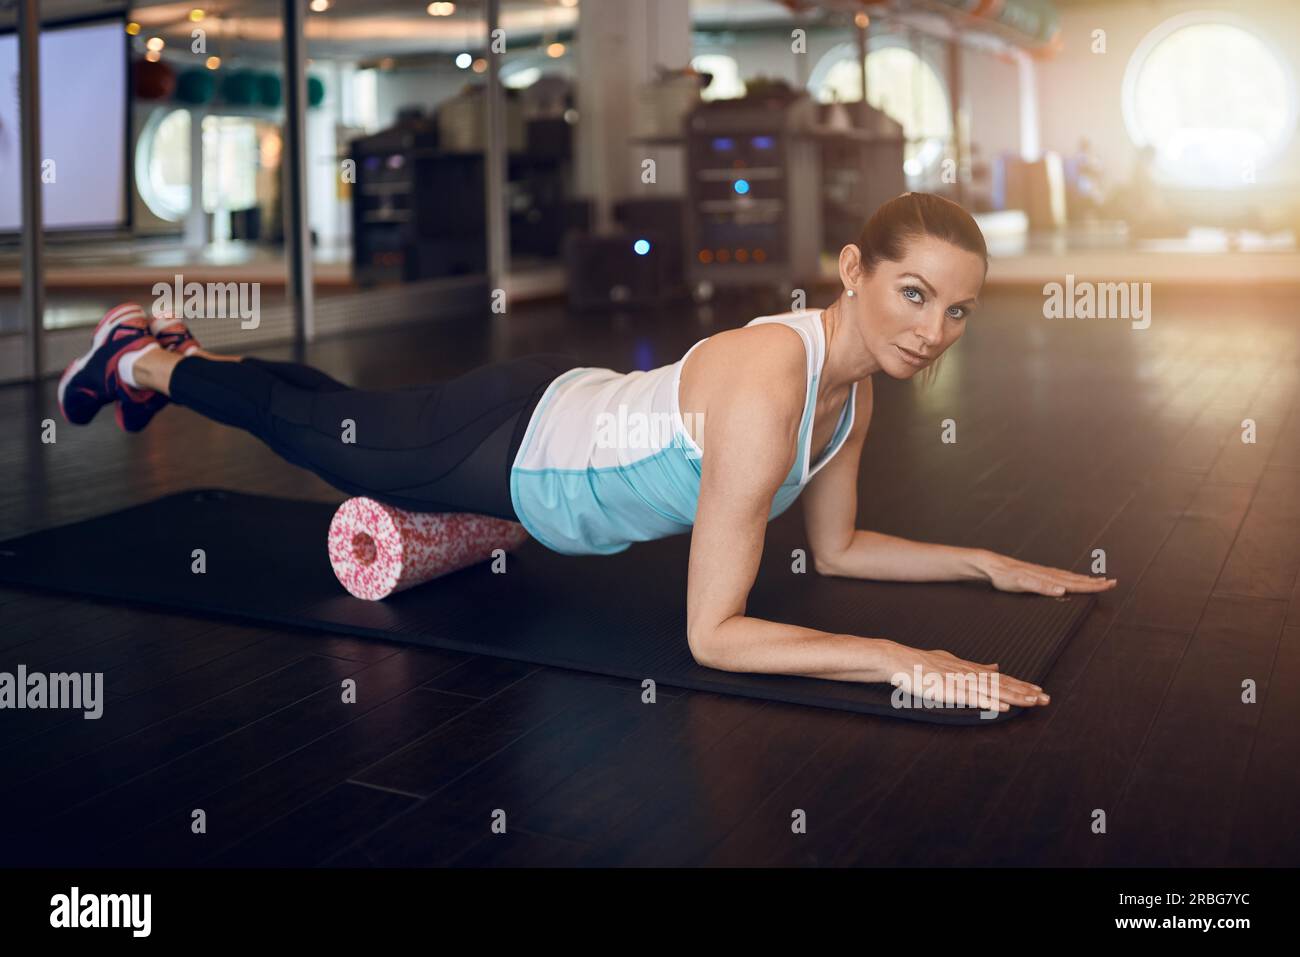 Woman in mint sleeveless shirt and black leggings in gym doing exercise with foam or fascia roll and looking at camera Stock Photo